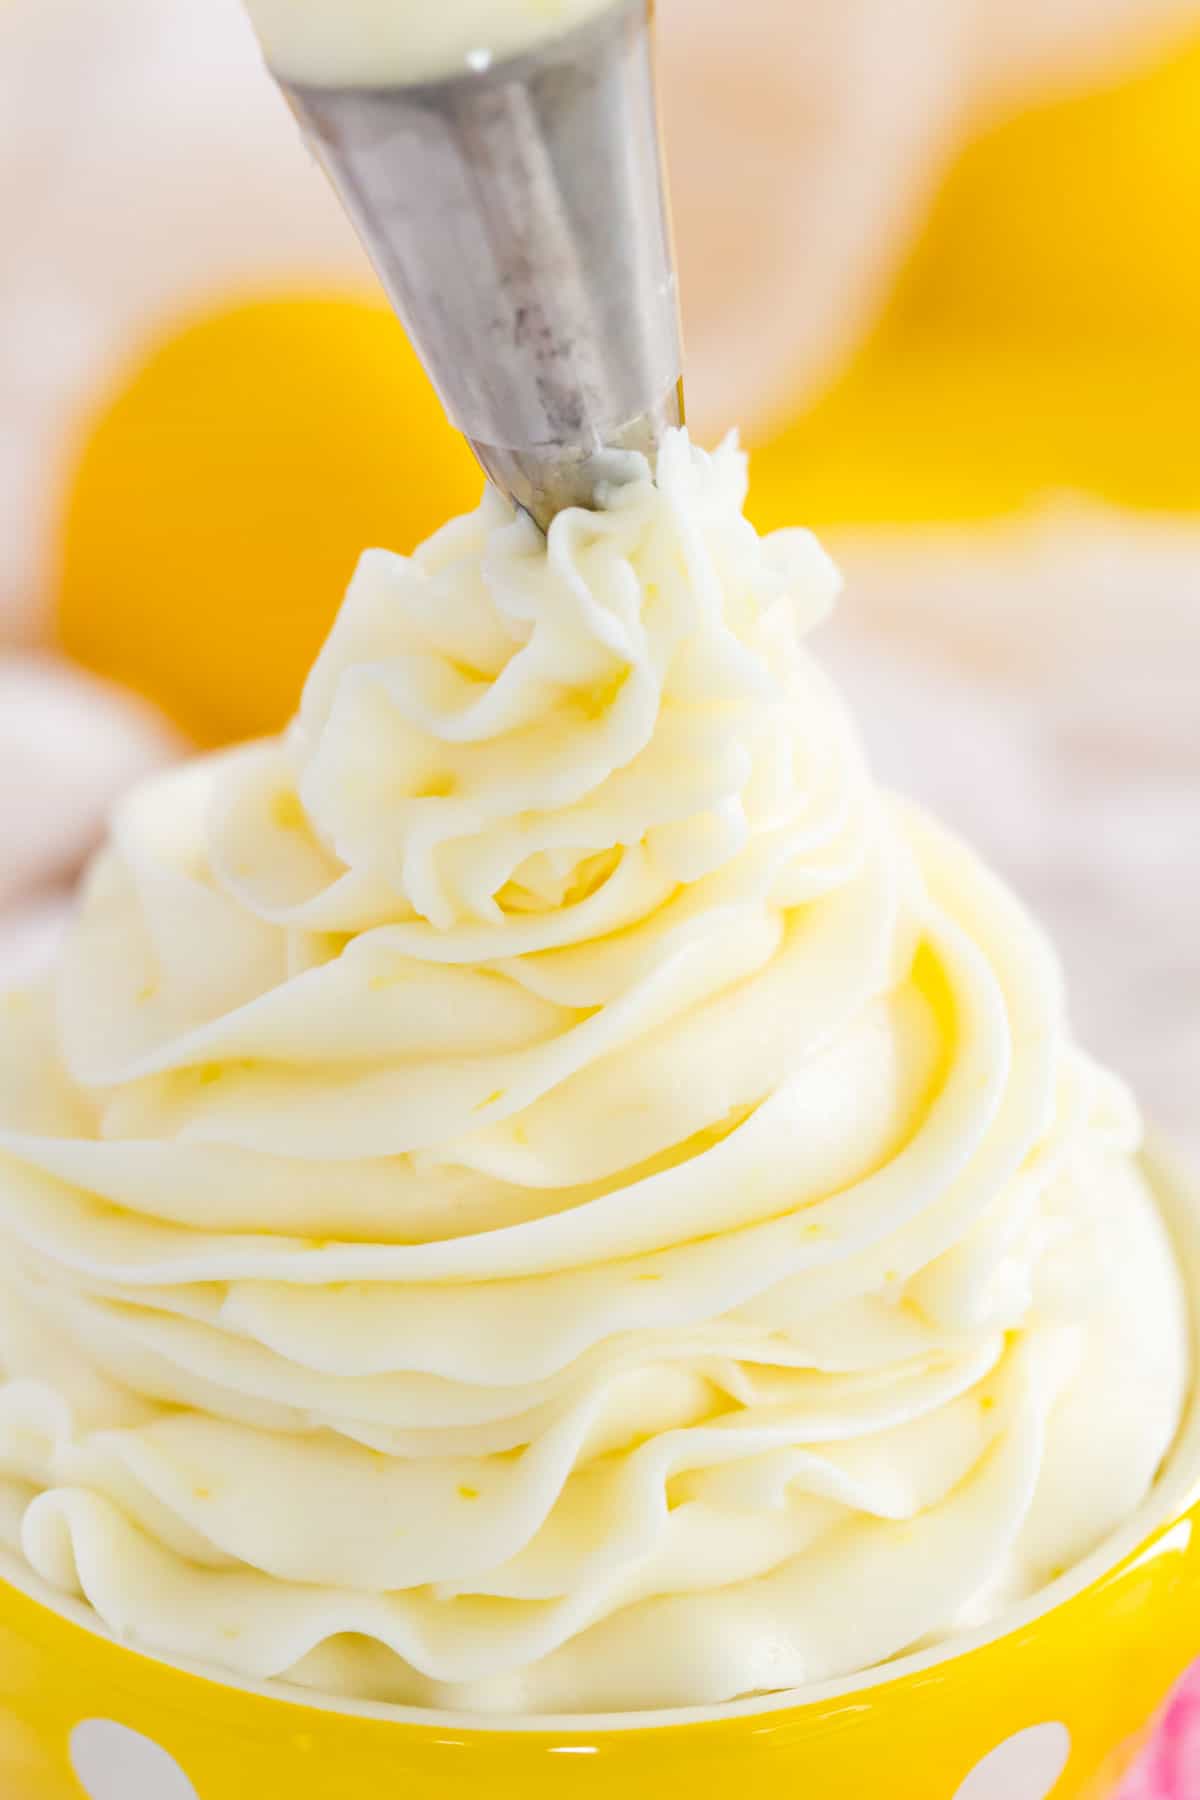 Close up of lemon buttercream frosting piped into a small yellow bowl with white polka dots.